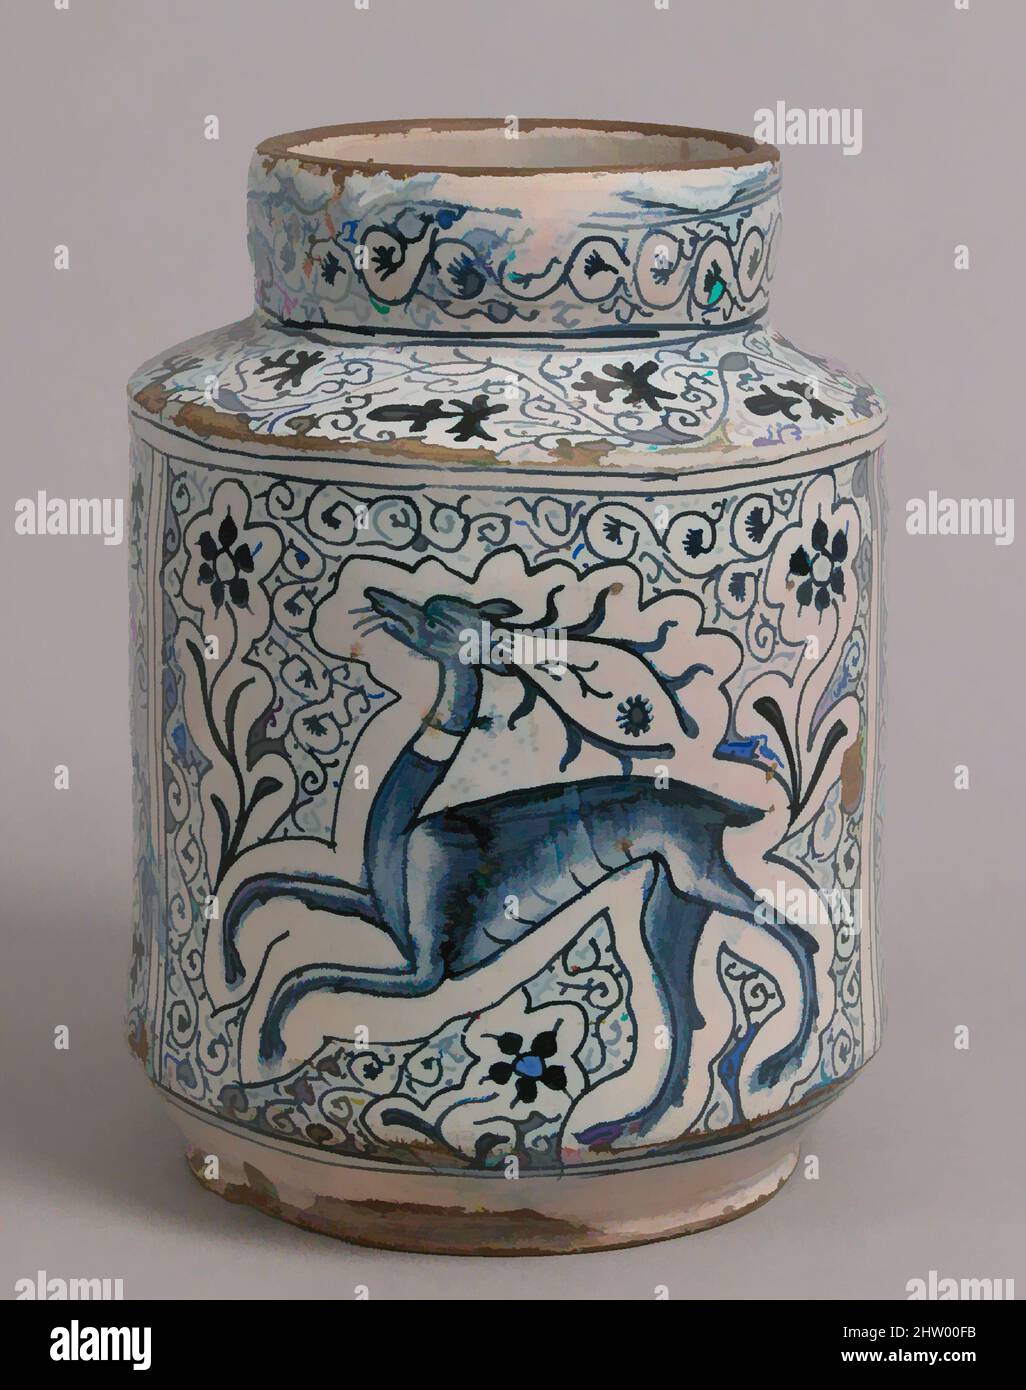 Art inspired by Pharmacy Jar, 1400s, Made in Florence, Tuscany, Italy, Italian, Tin-glazed earthenware, Overall: 9 3/16 x 6 7/8 in. (23.4 x 17.4 cm), Ceramics, Maiolica storage jars for Italian pharmacies were highly decorative and frequently combined animal and floral motifs, as, Classic works modernized by Artotop with a splash of modernity. Shapes, color and value, eye-catching visual impact on art. Emotions through freedom of artworks in a contemporary way. A timeless message pursuing a wildly creative new direction. Artists turning to the digital medium and creating the Artotop NFT Stock Photo